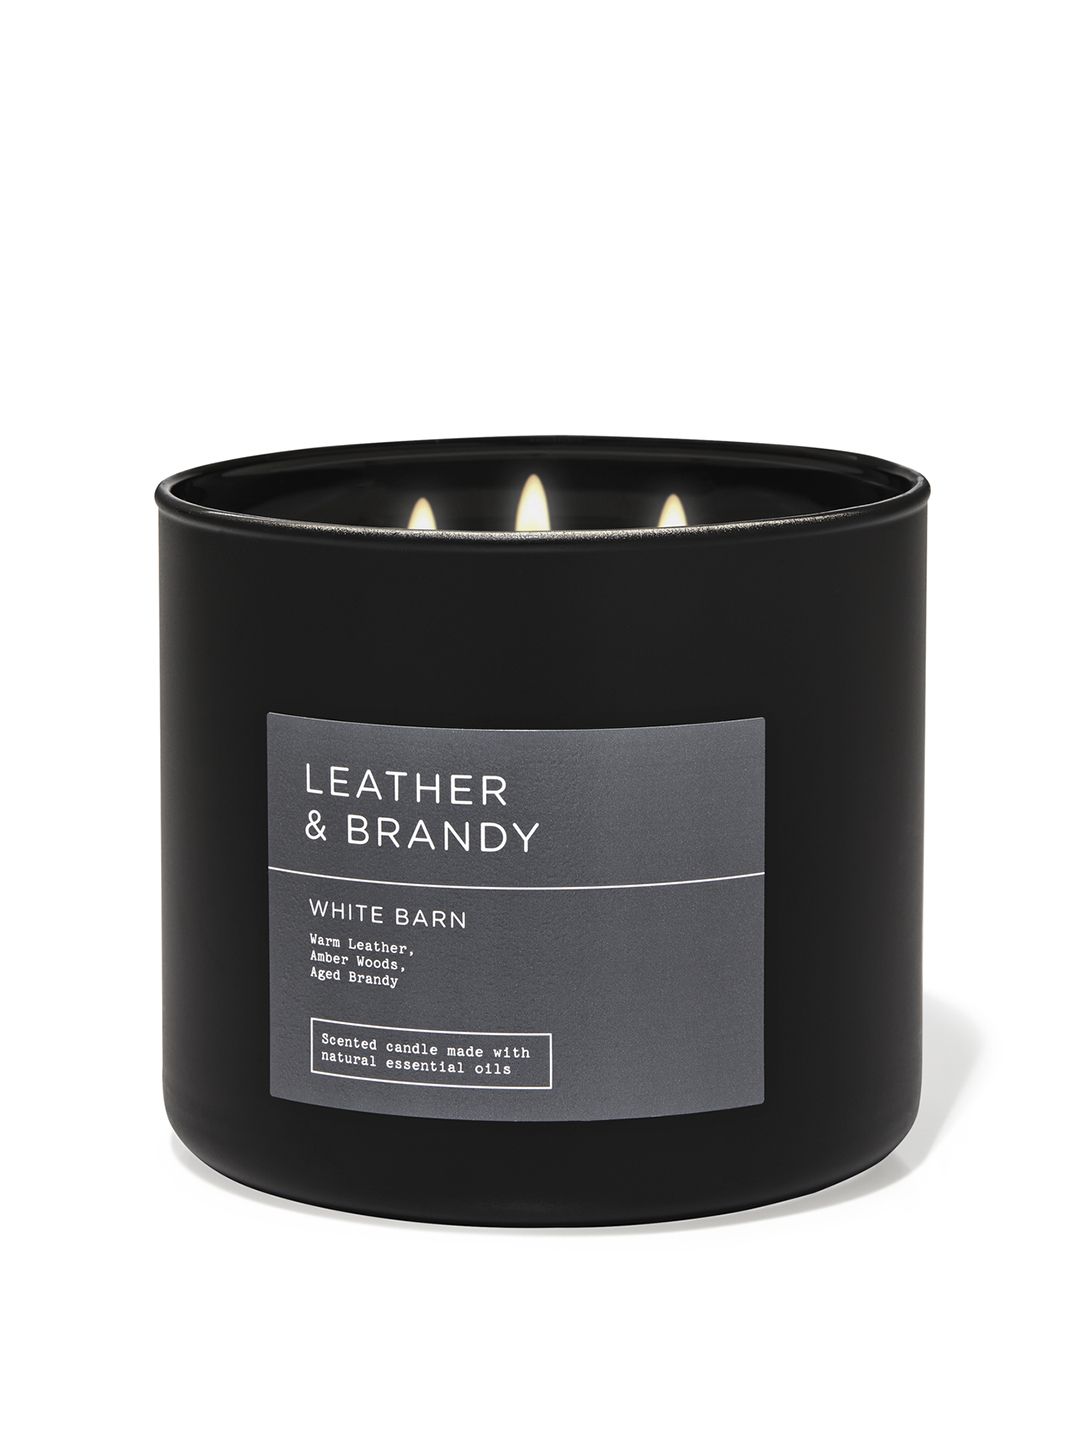 Bath & Body Works White Barn Leather & Brandy 3-Wick Scented Candle -  411 g Price in India